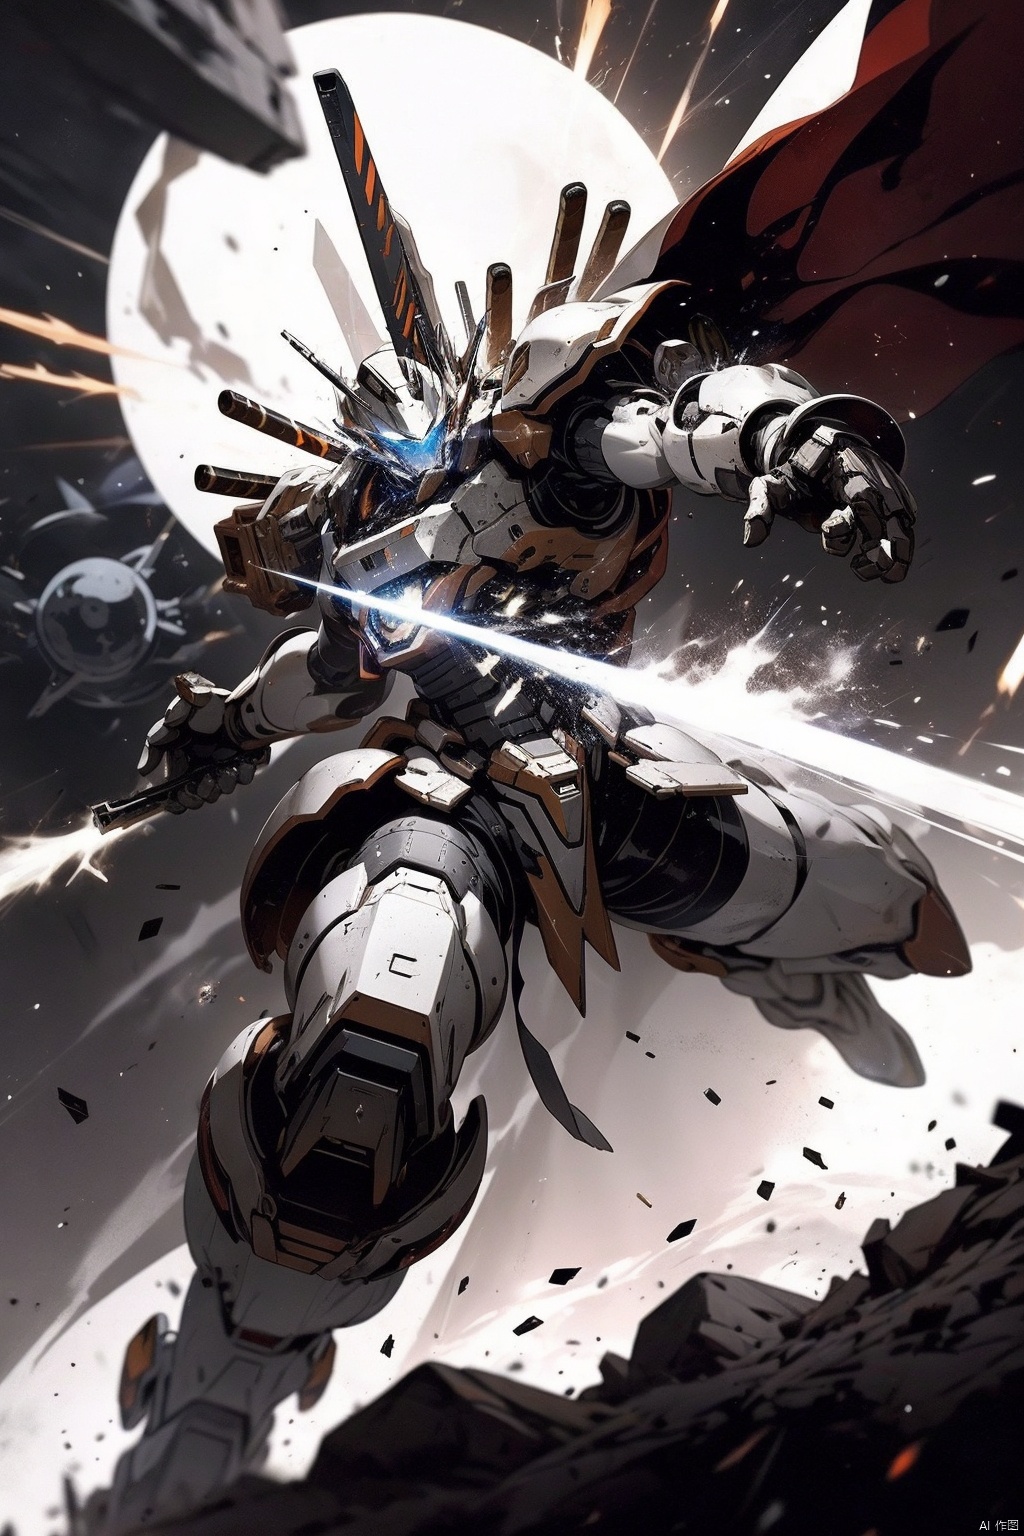  ,Combat attitude,Explosion effect,Sparks flew everywhere,Flame rise,Knife with one hand, gun with one hand,Flying in space,Giant planet behind,Black and white metal style, mecha_robot, Super perspective